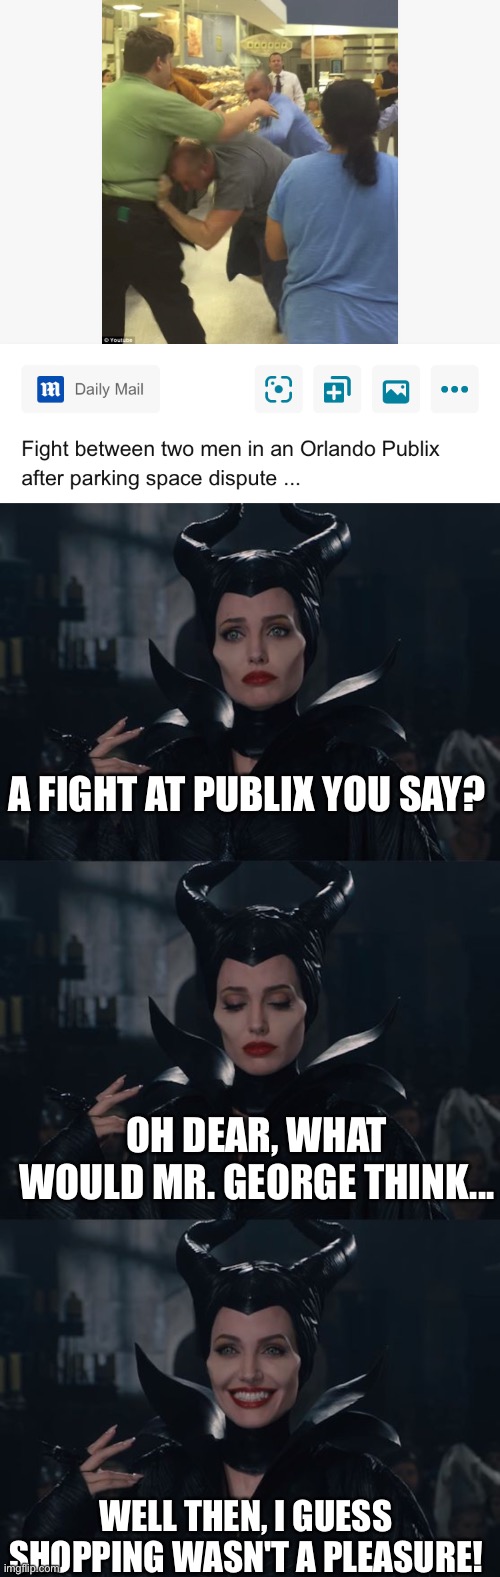 Maleficent’s Comedy Cavalcade. | A FIGHT AT PUBLIX YOU SAY? OH DEAR, WHAT WOULD MR. GEORGE THINK... WELL THEN, I GUESS SHOPPING WASN'T A PLEASURE! | image tagged in bad pun maleficent,publix,bad taste | made w/ Imgflip meme maker